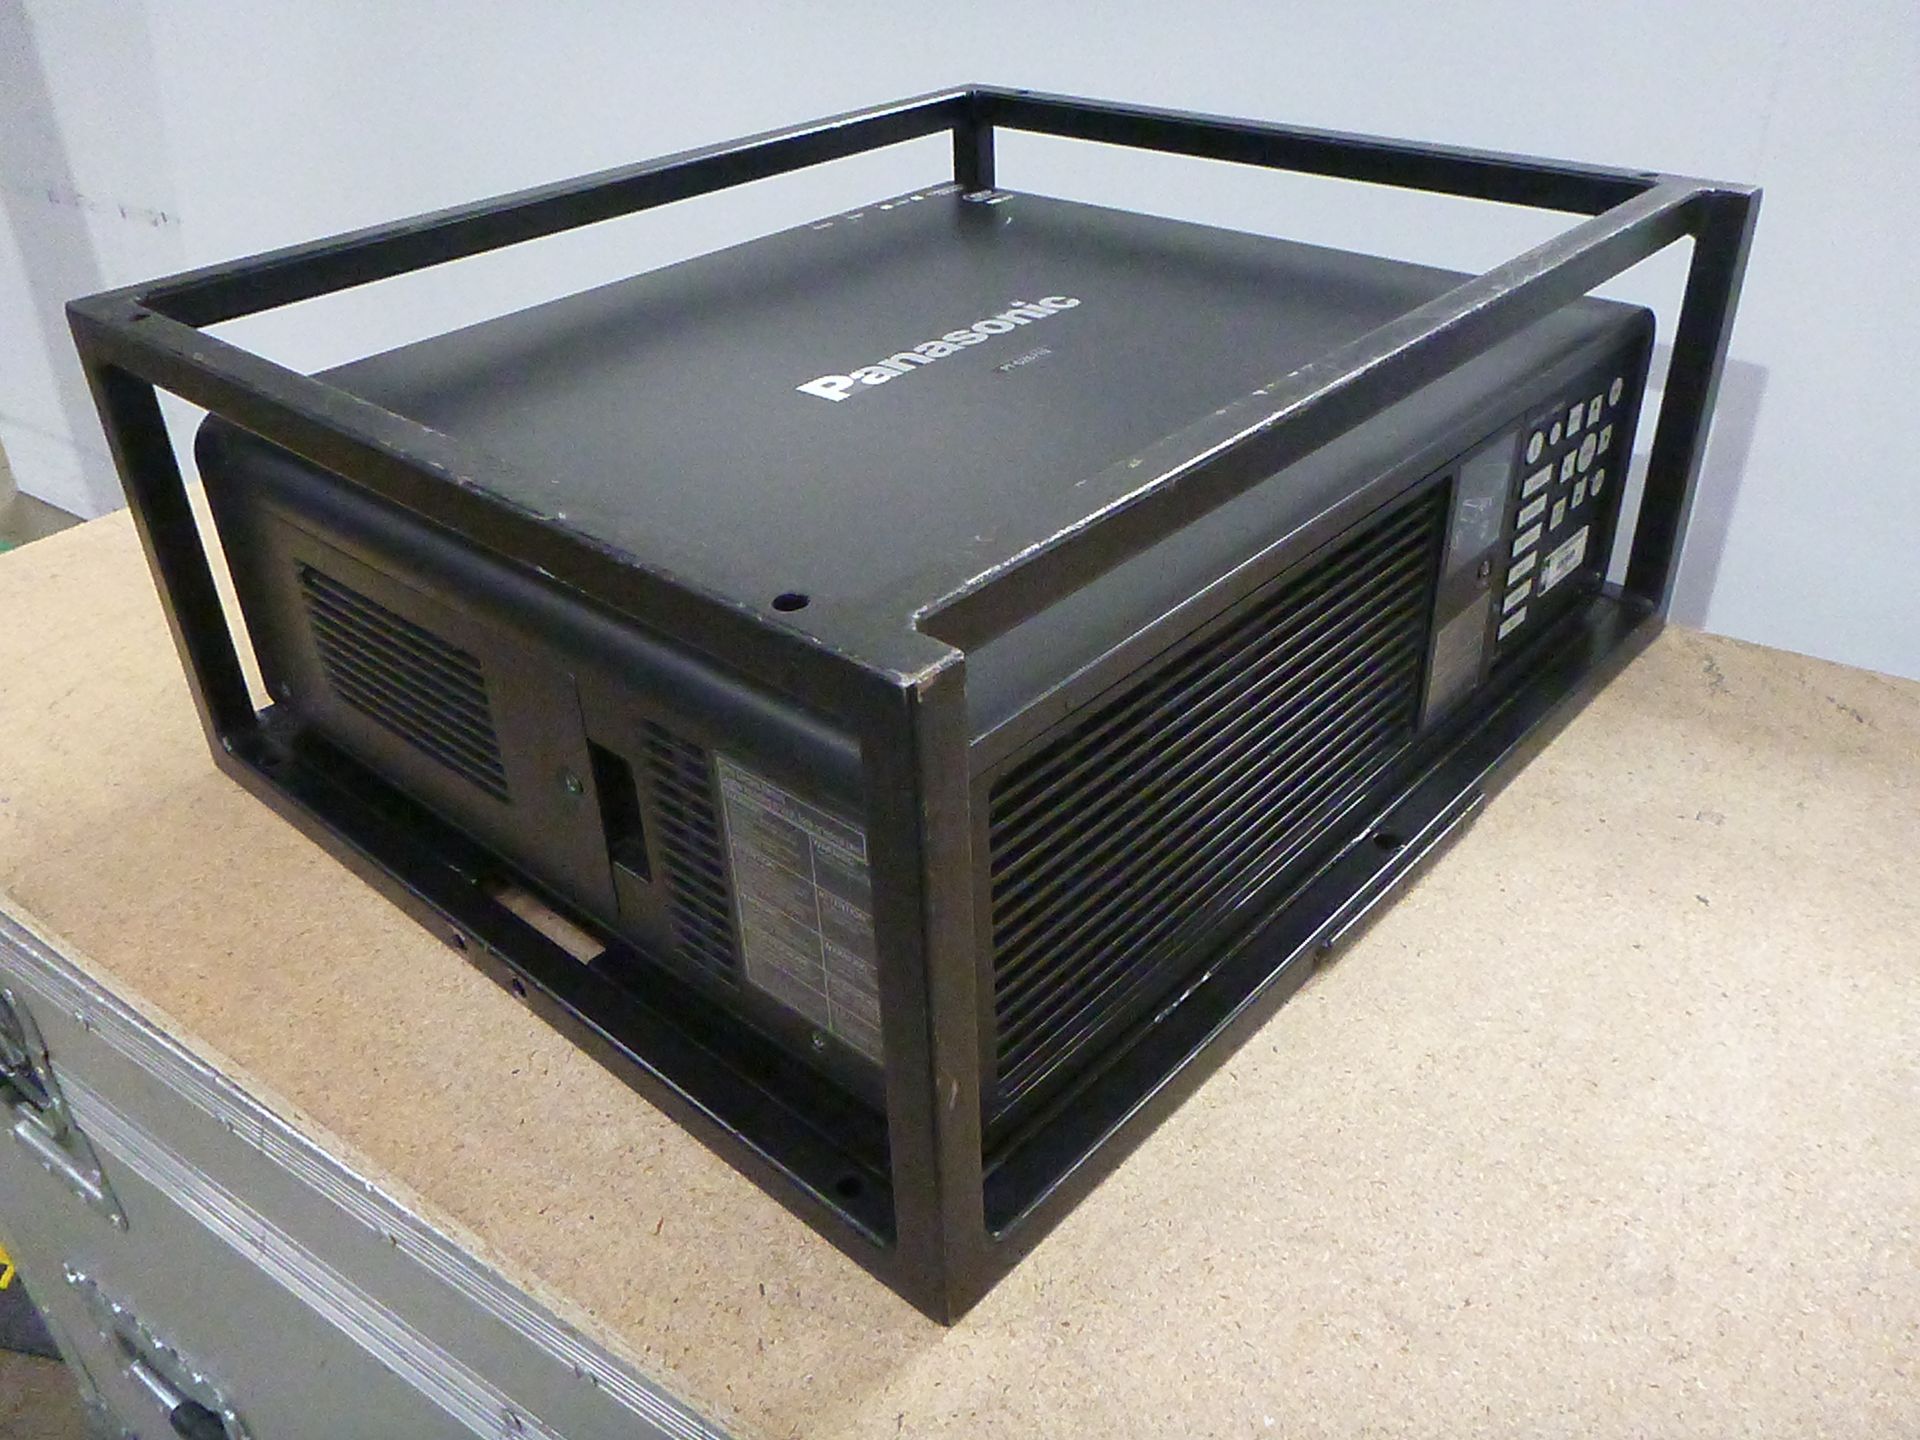 Panasonic Projector, Model PT-DZ6710E, S/N SH0150007, YOM 2010, In flight case with standard 1.3-1. - Image 3 of 13